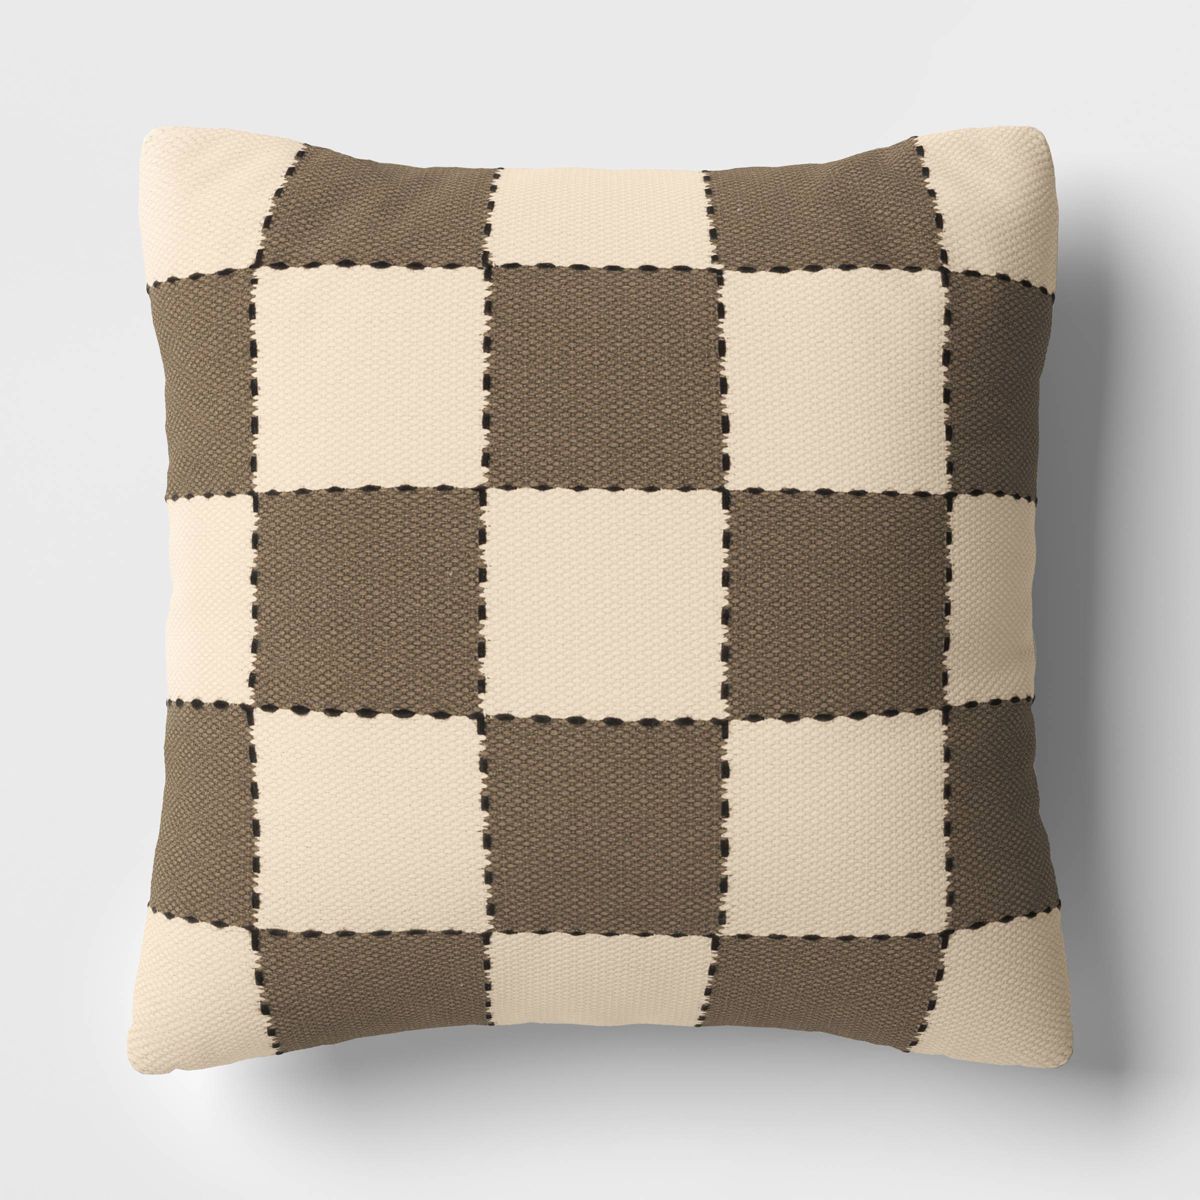 18"x18" Checkerboard Square Outdoor Throw Pillow Brown/Beige - Threshold™ | Target